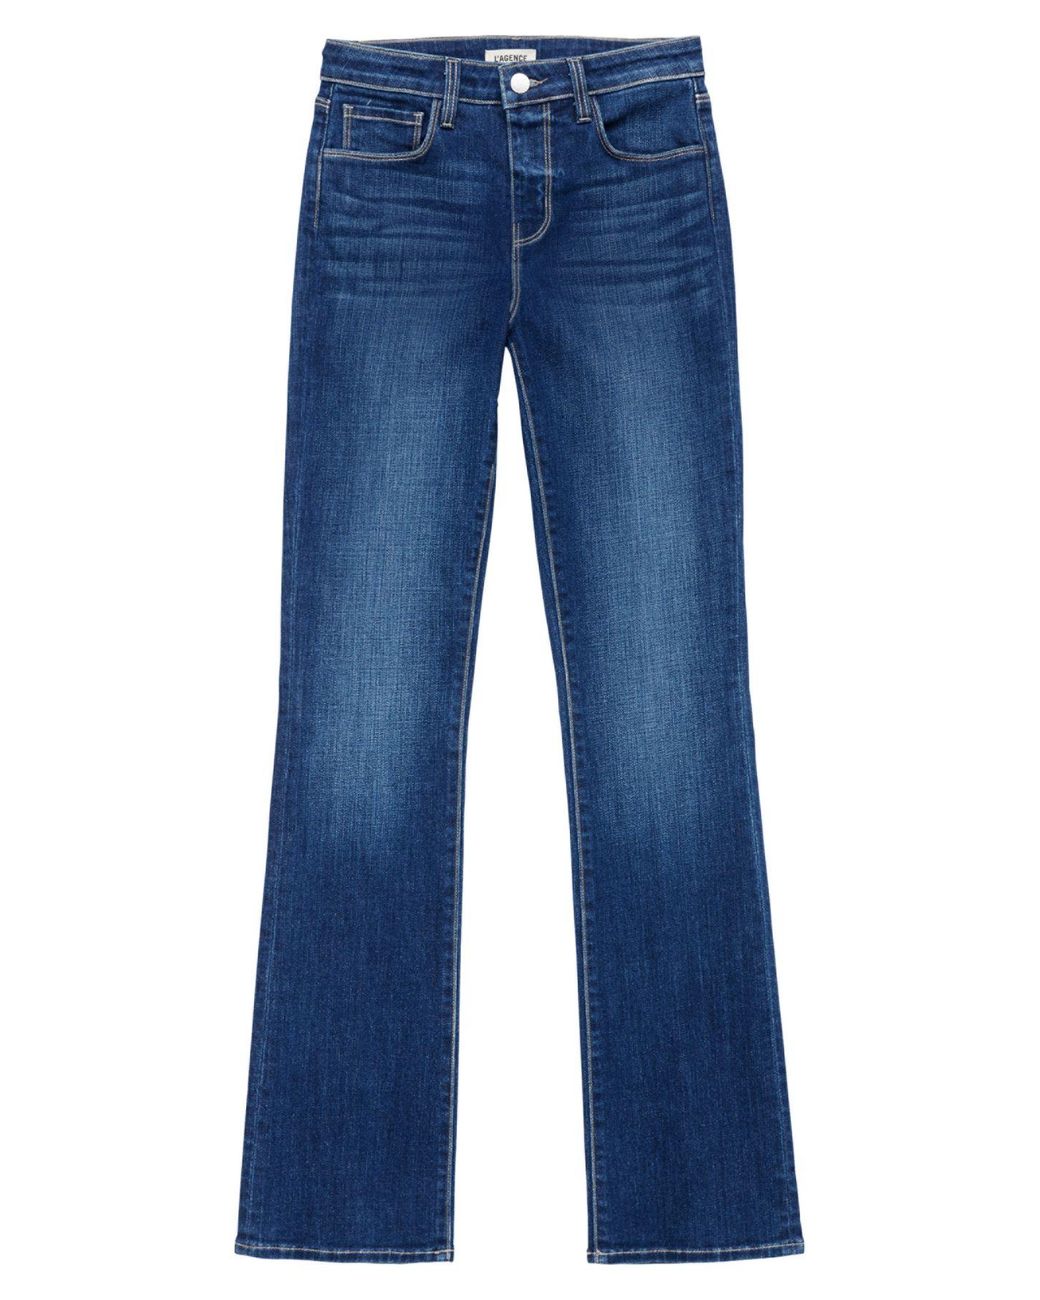 L'Agence Denim Oriana High-rise Straight Jeans in Blue - Lyst